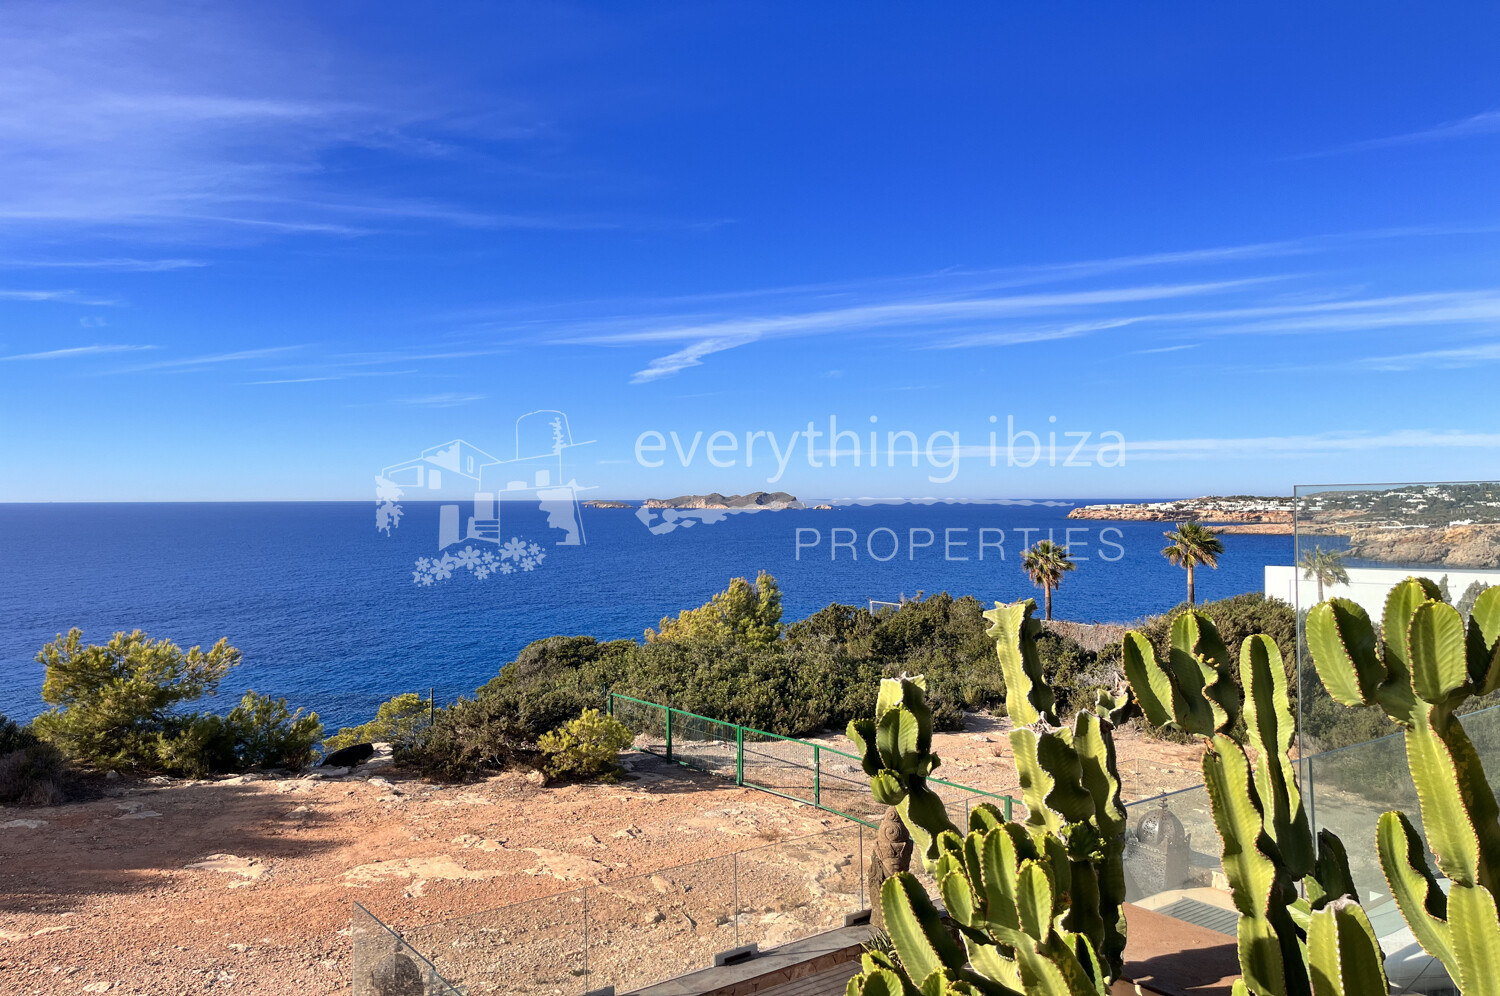 Stylish Modern Townhouse with Sea and Year Round Sunset Views ref. 1638, for sale in Ibiza by everything ibiza Properties